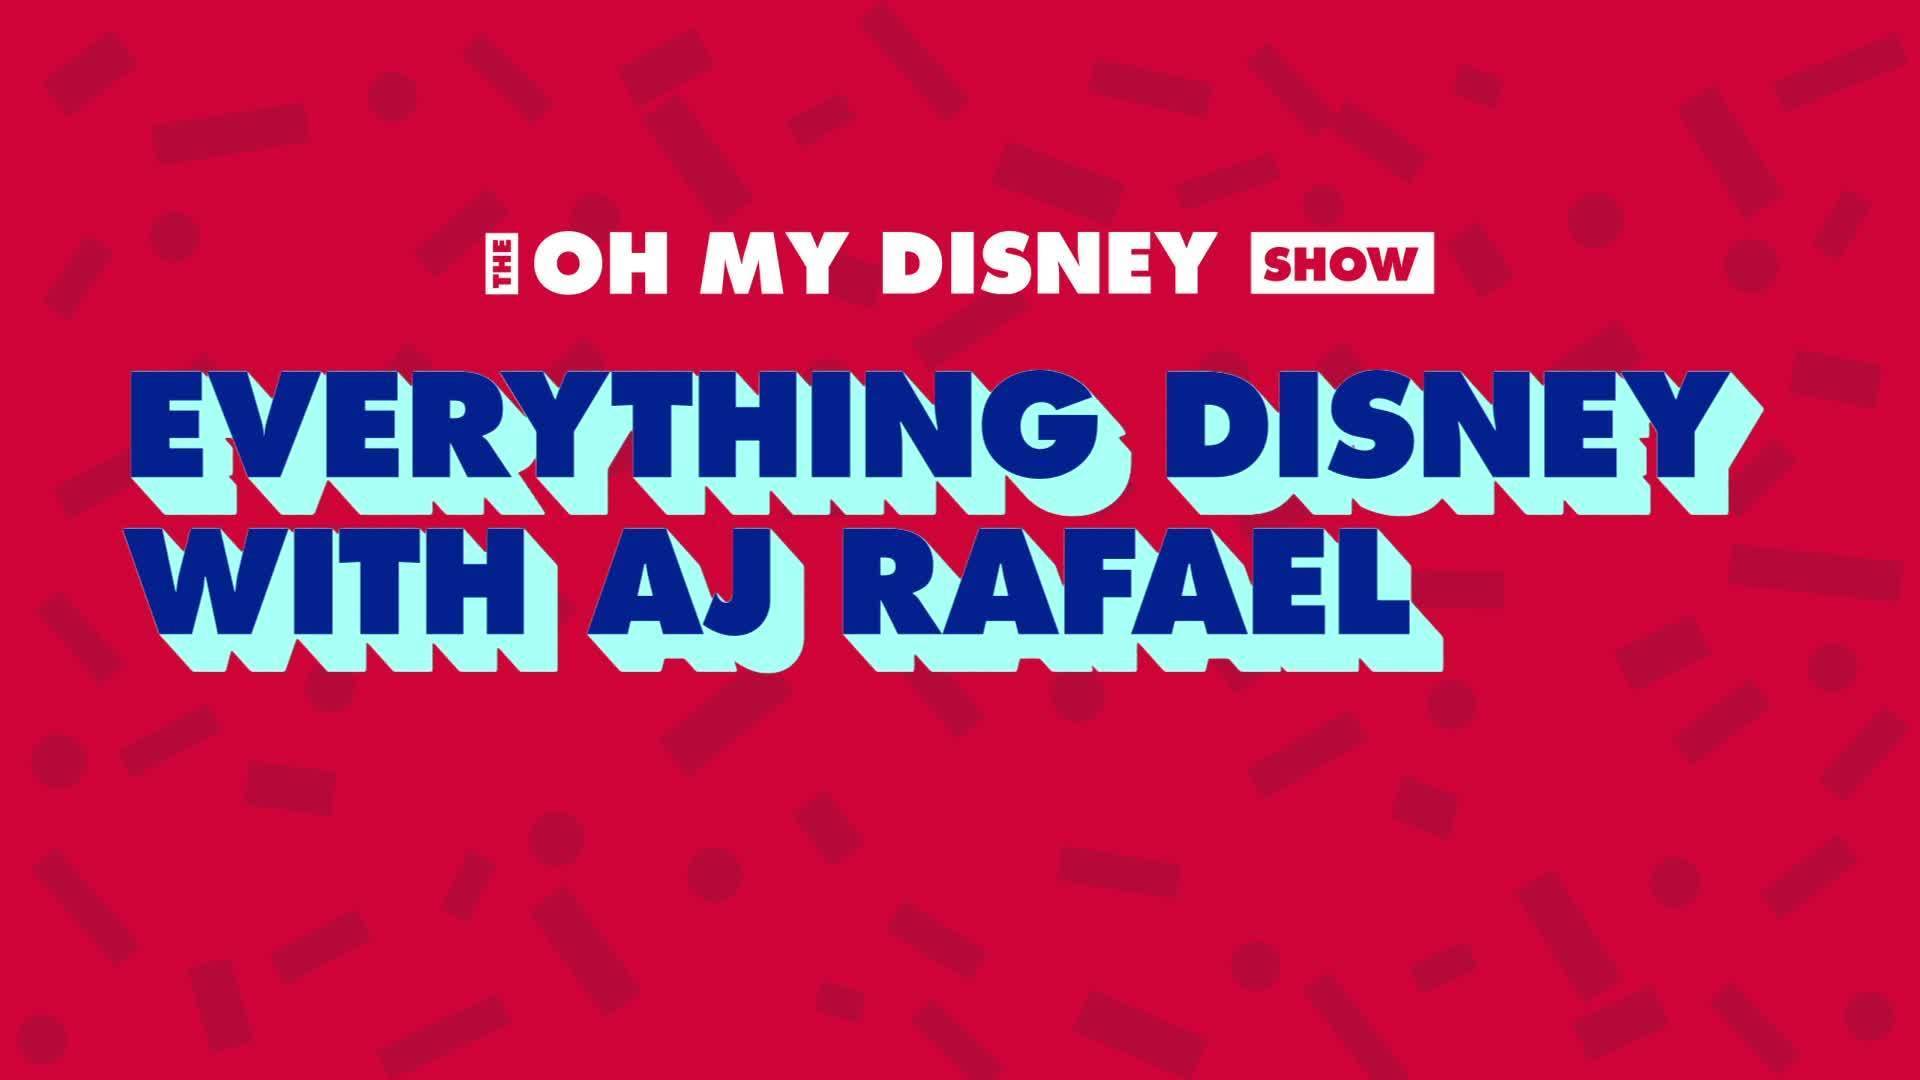 An Interview with AJ Rafael | The Oh My Disney Show